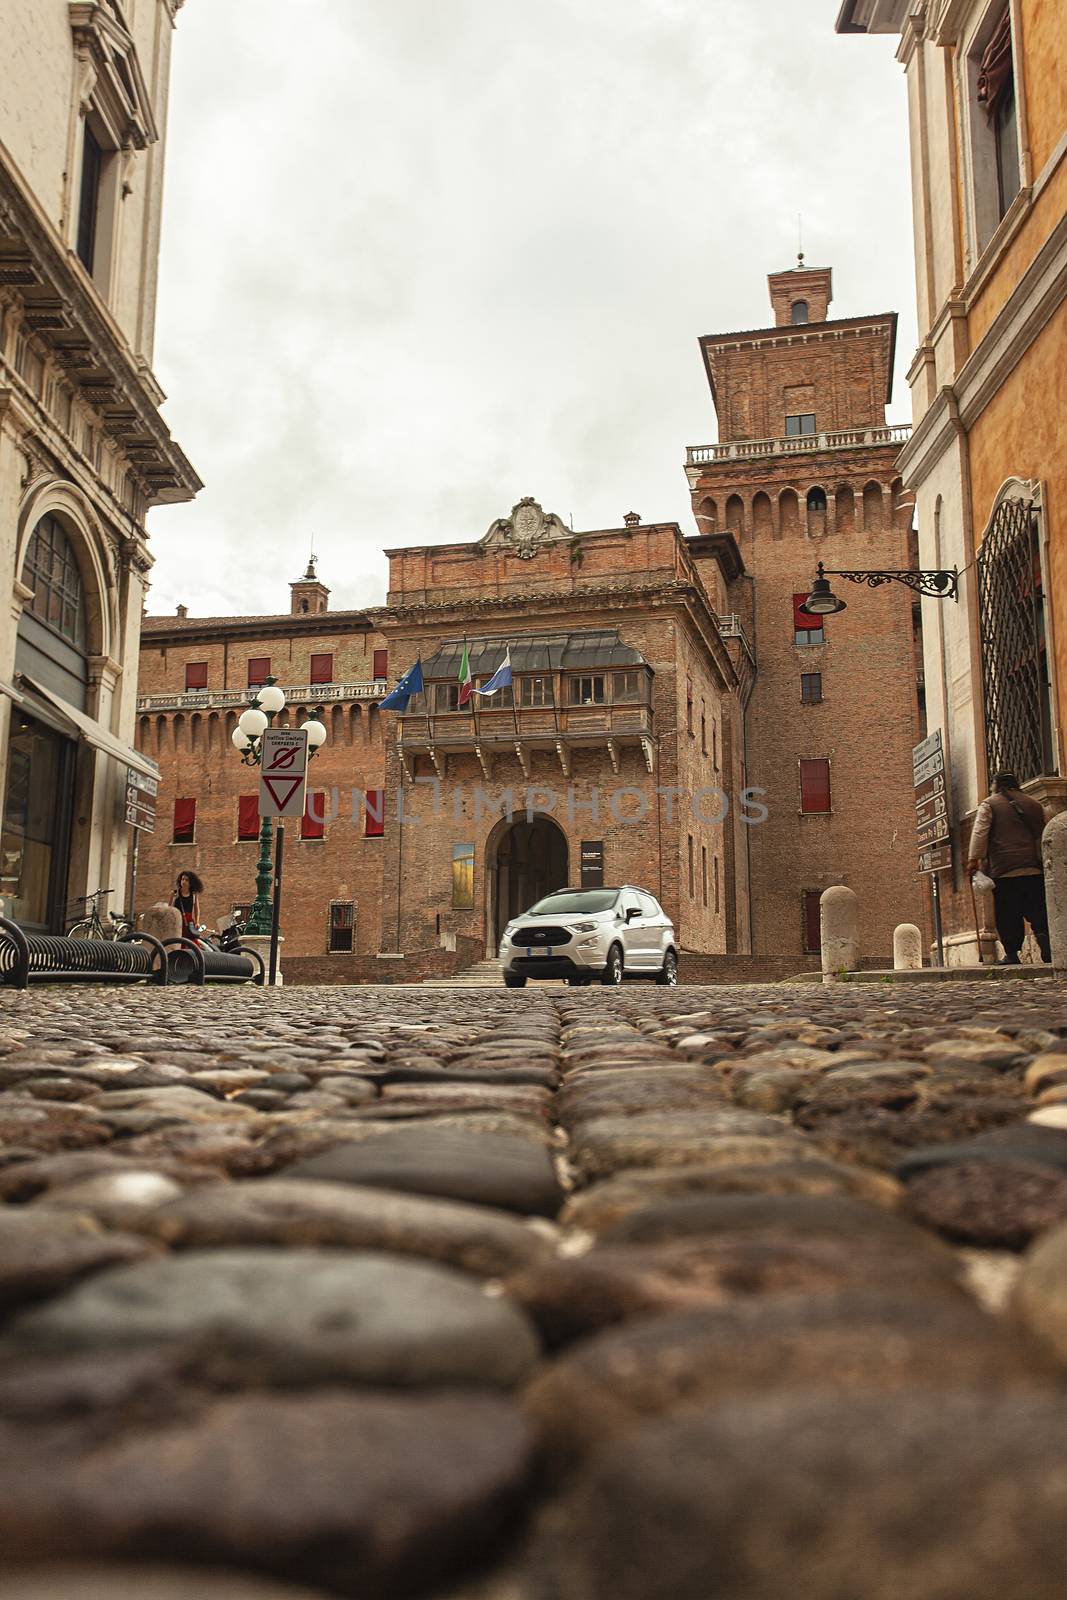 View of the castle of Ferrara from the street in front of it 4 by pippocarlot